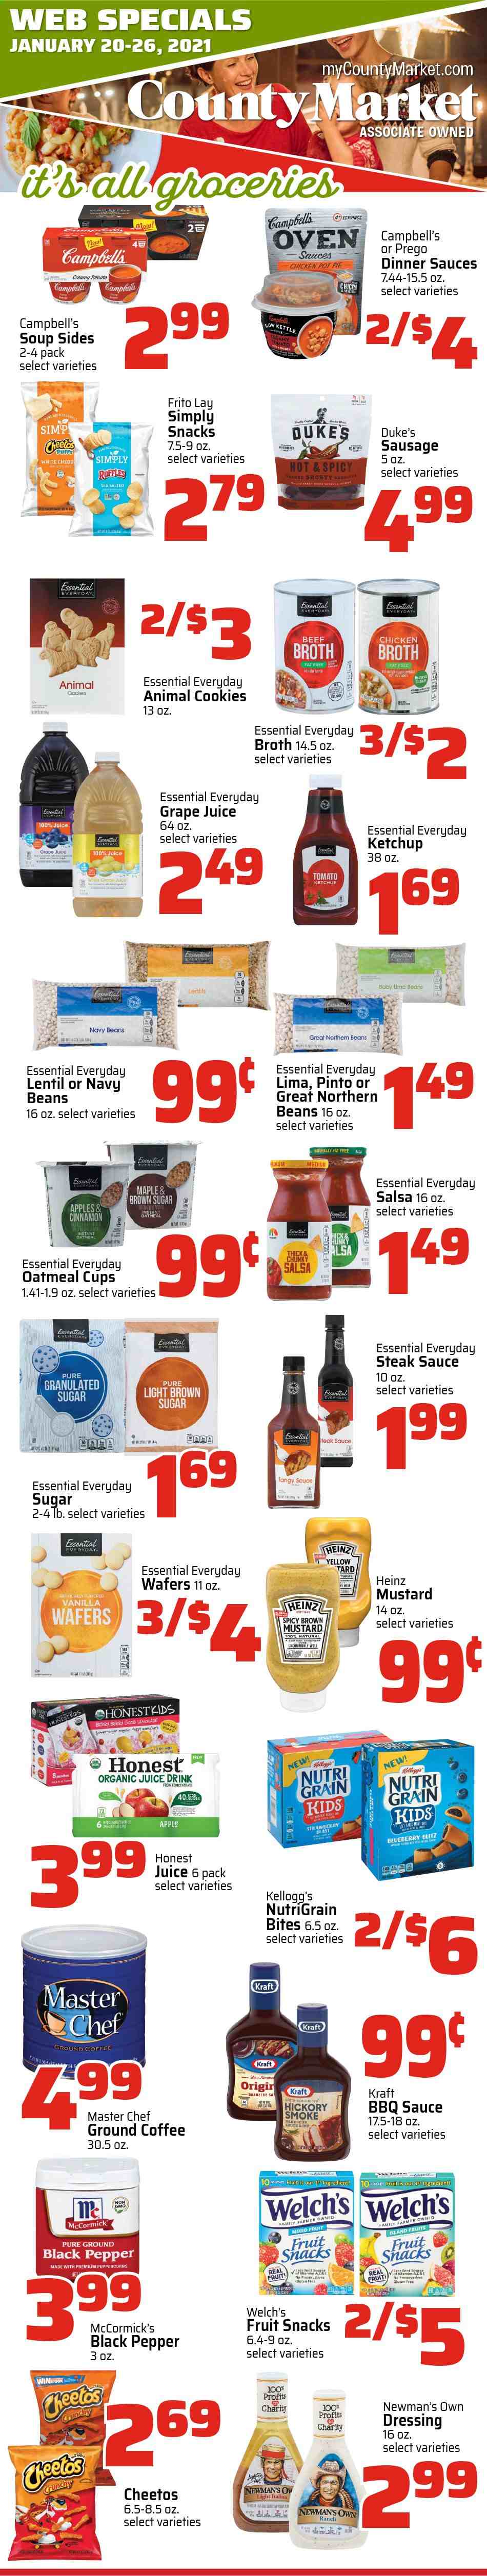 thumbnail - County Market Flyer - 01/20/2021 - 01/26/2021 - Sales products - pot pie, pie, apples, Campbell's, soup, Welch's, Kraft®, sausage, salsa, dip, beans, wafers, Kellogg's, fruit snack, cookies, Cheetos, Ruffles, granulated sugar, broth, chicken broth, cane sugar, oatmeal, lentils, Heinz, Nutri-Grain, navy beans, lima beans, black pepper, cinnamon, steak sauce, BBQ sauce, ketchup, dressing, mustard, lemonade, juice, ground coffee, coffee, steak. Page 3.